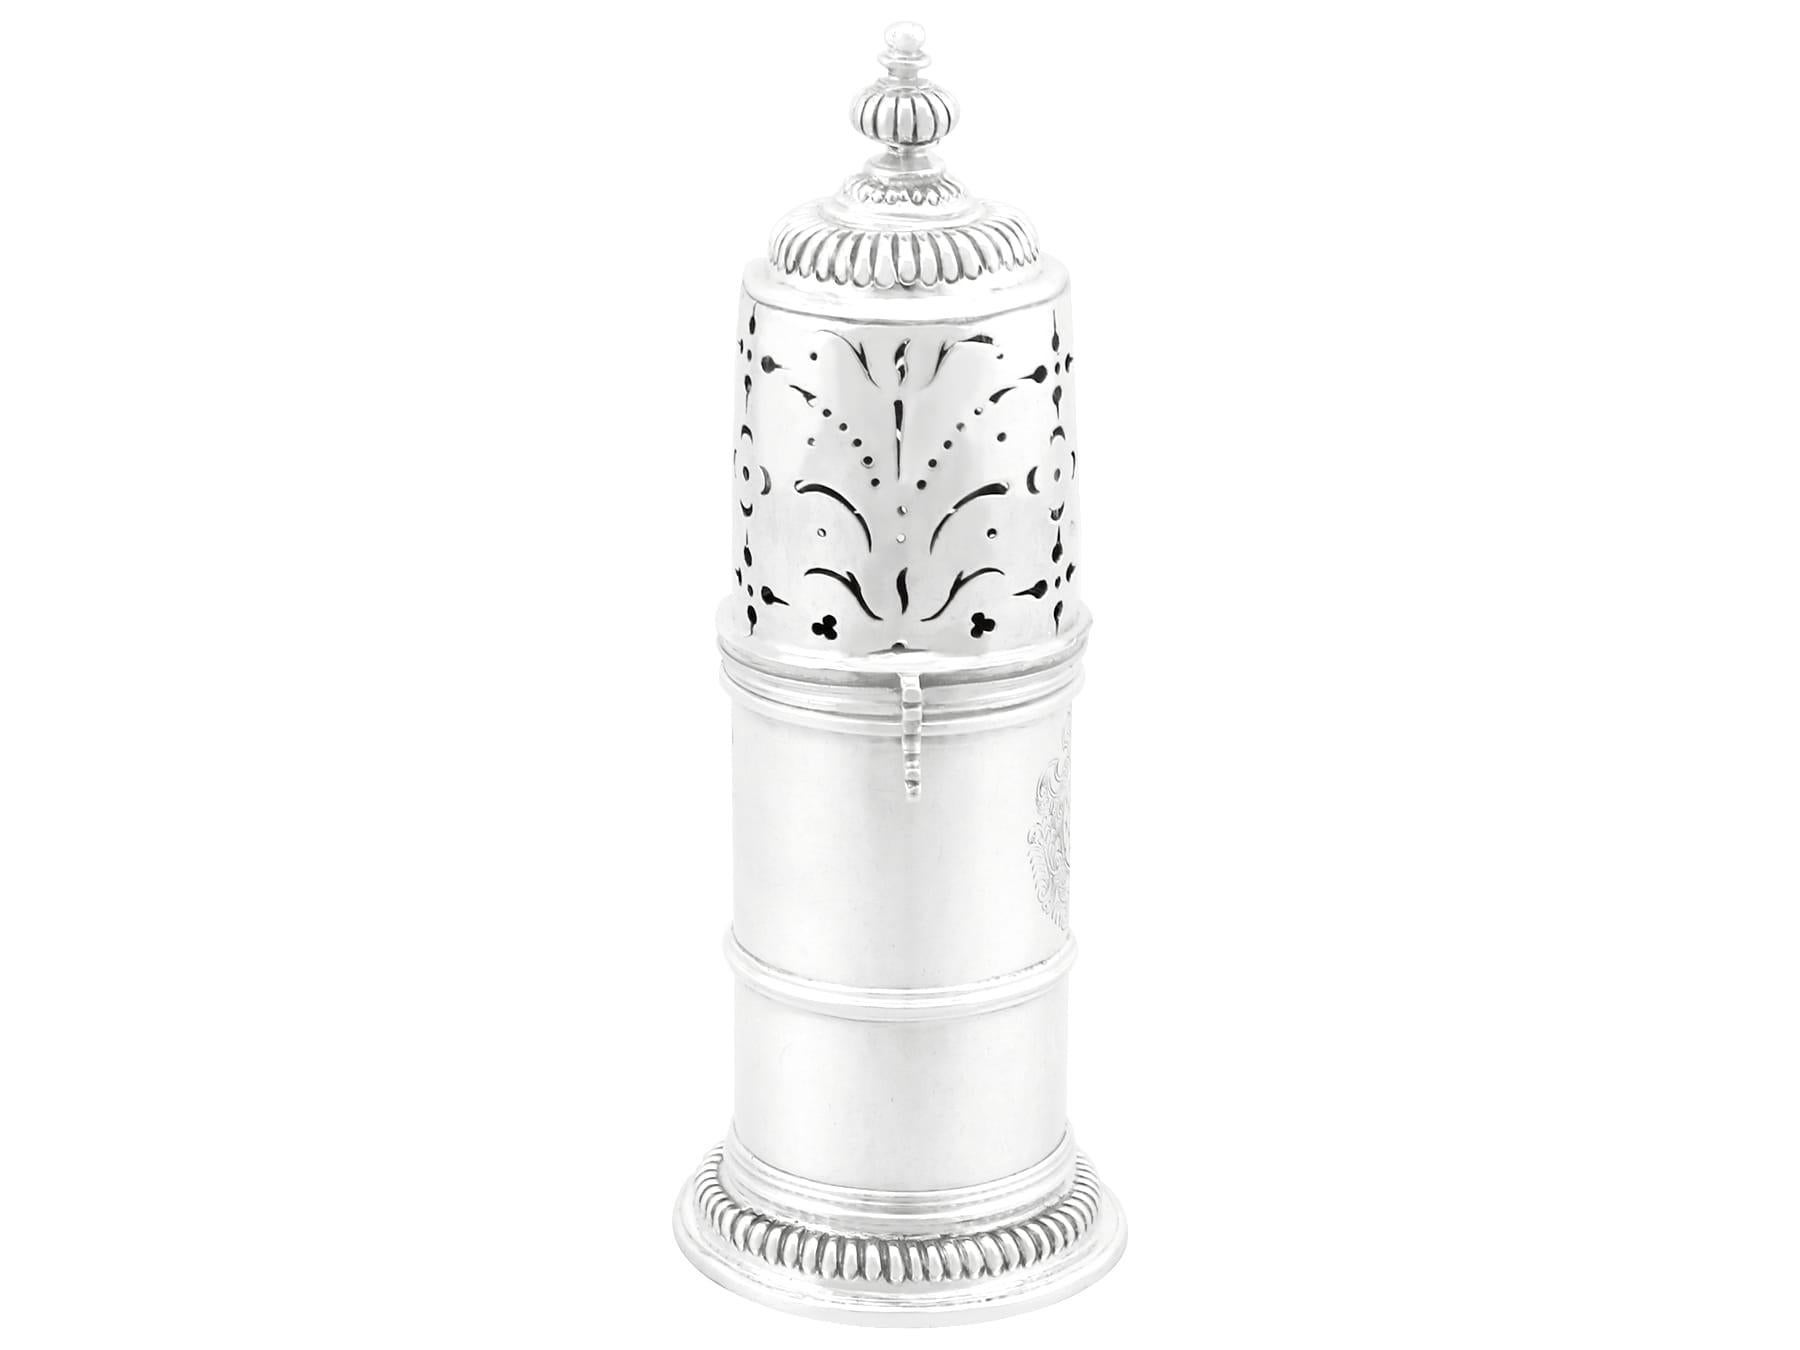 An exceptional, fine and impressive antique William III English Britannia standard silver lighthouse style caster; an addition to our silver teaware collection.

This exceptional antique William III English Britannia standard silver caster has a